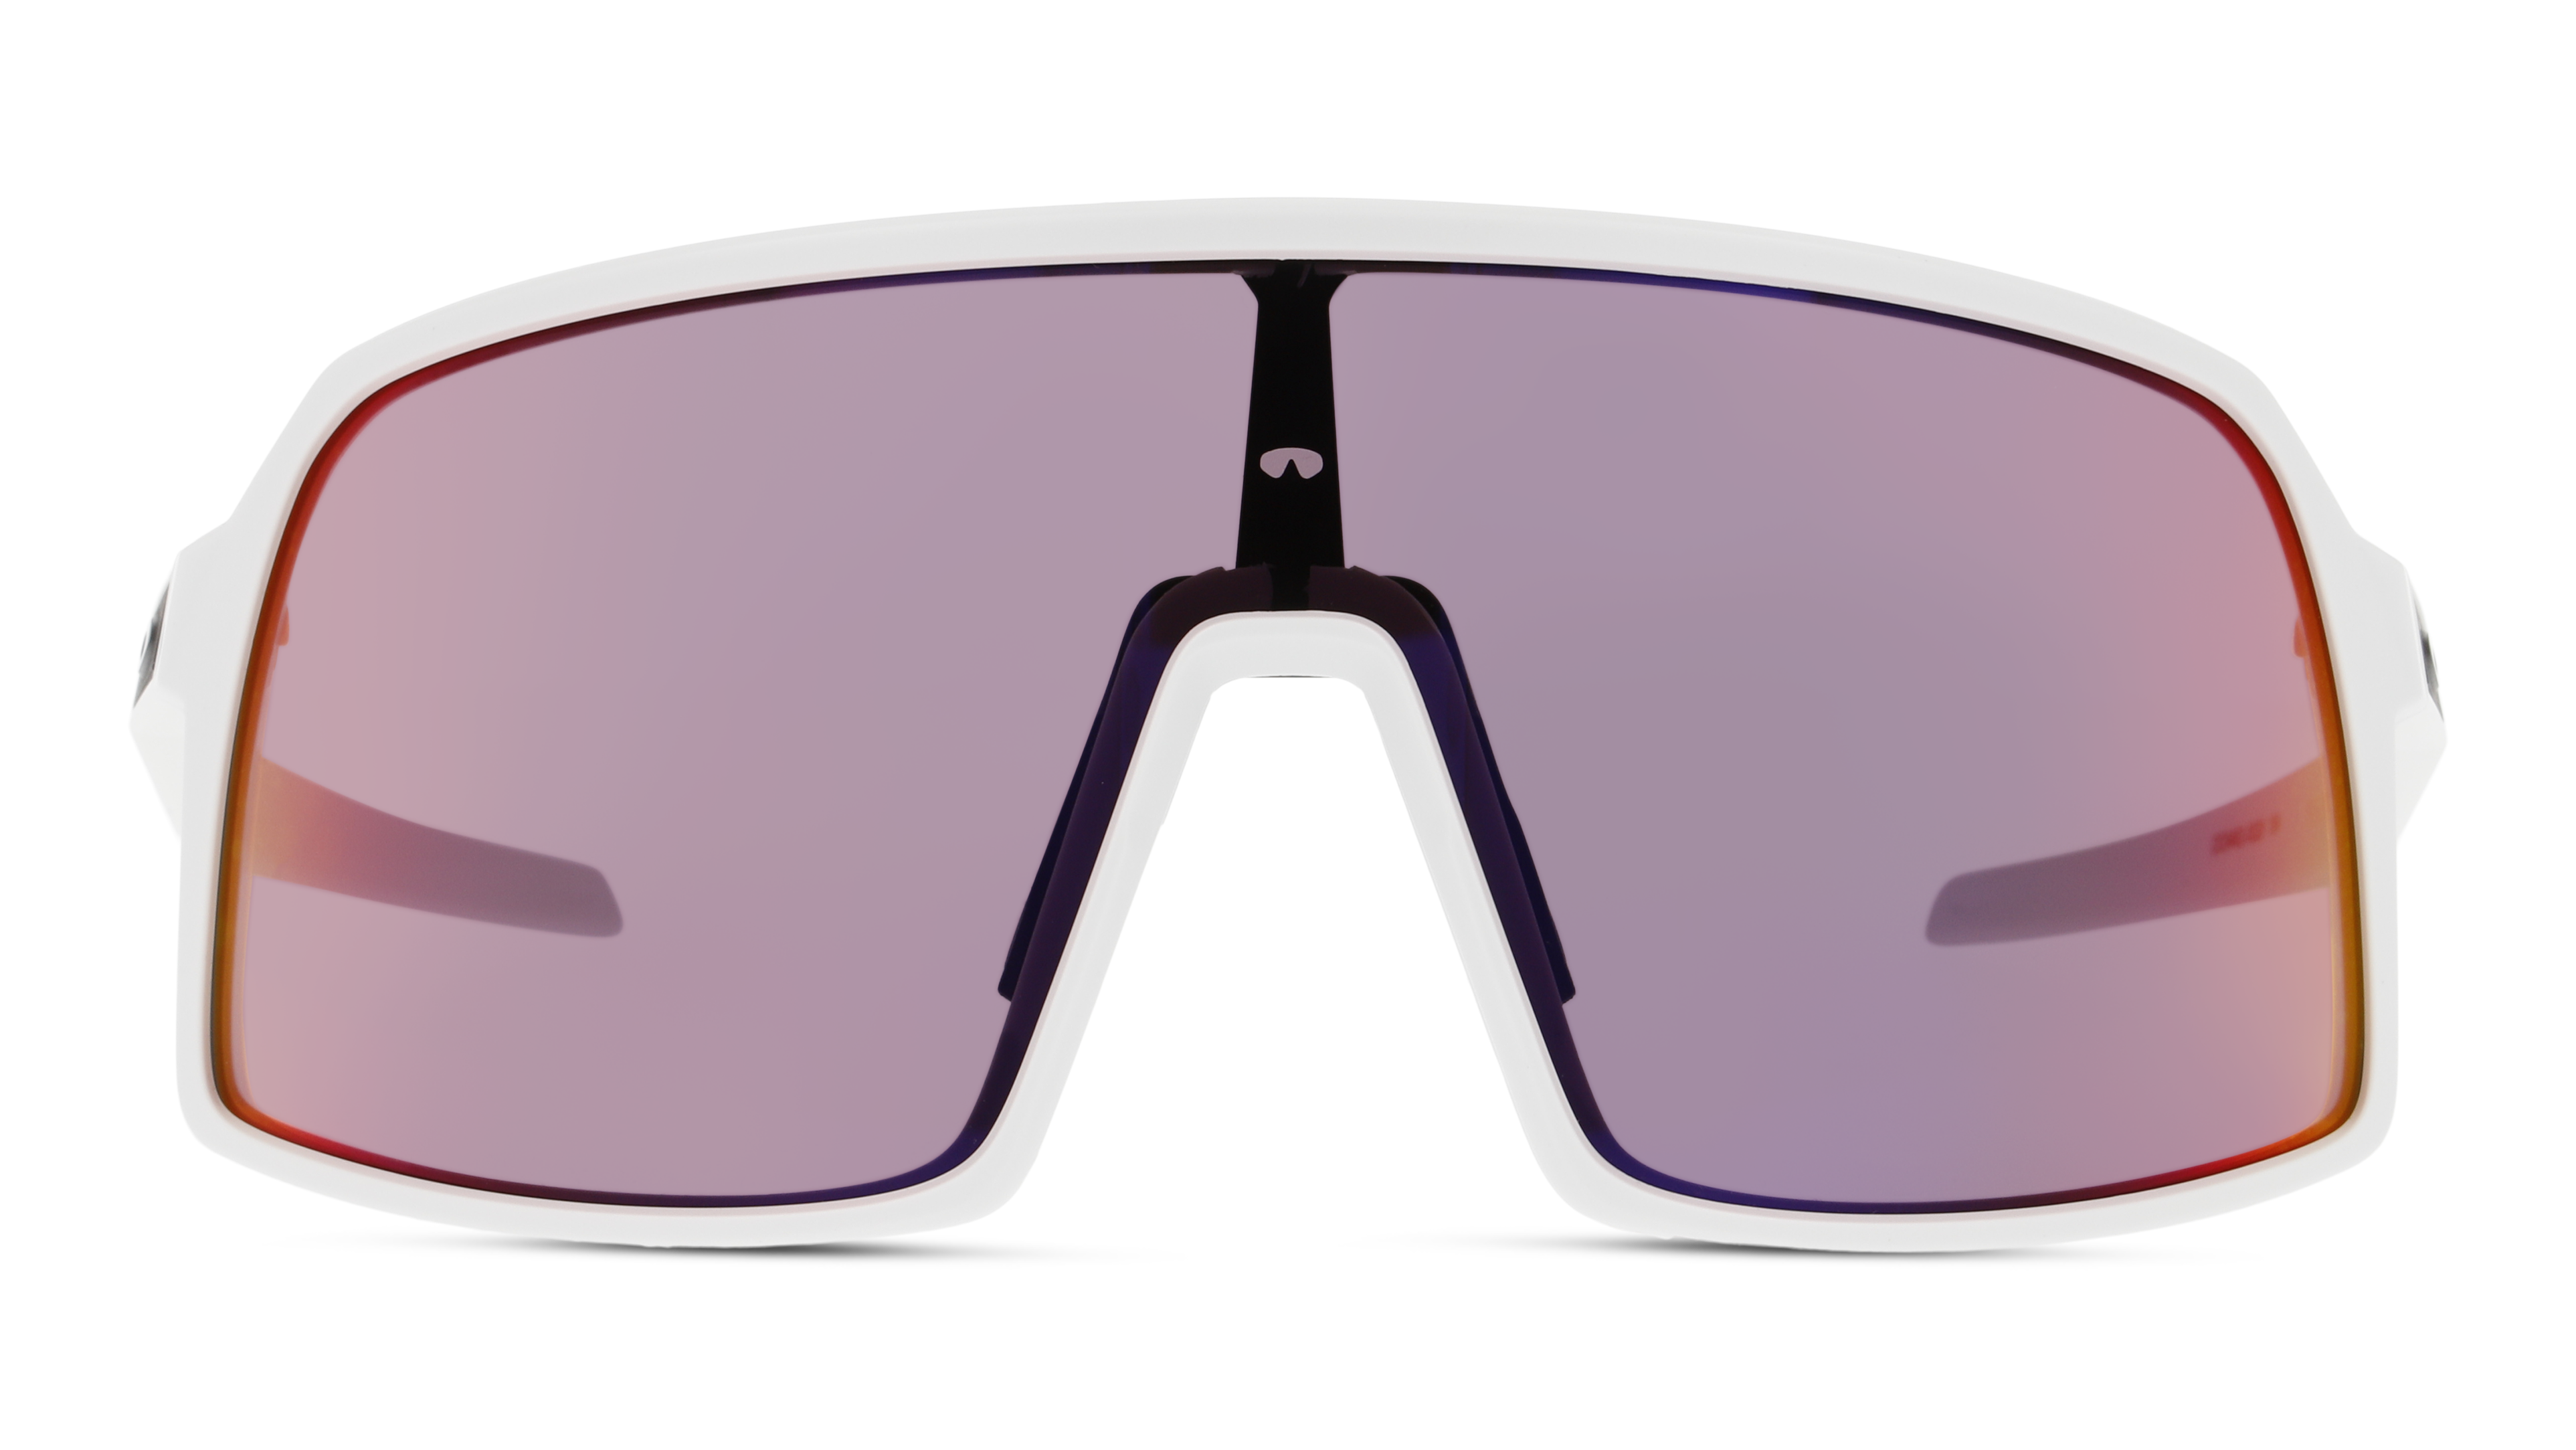 [products.image.front] Oakley OO9462 946205